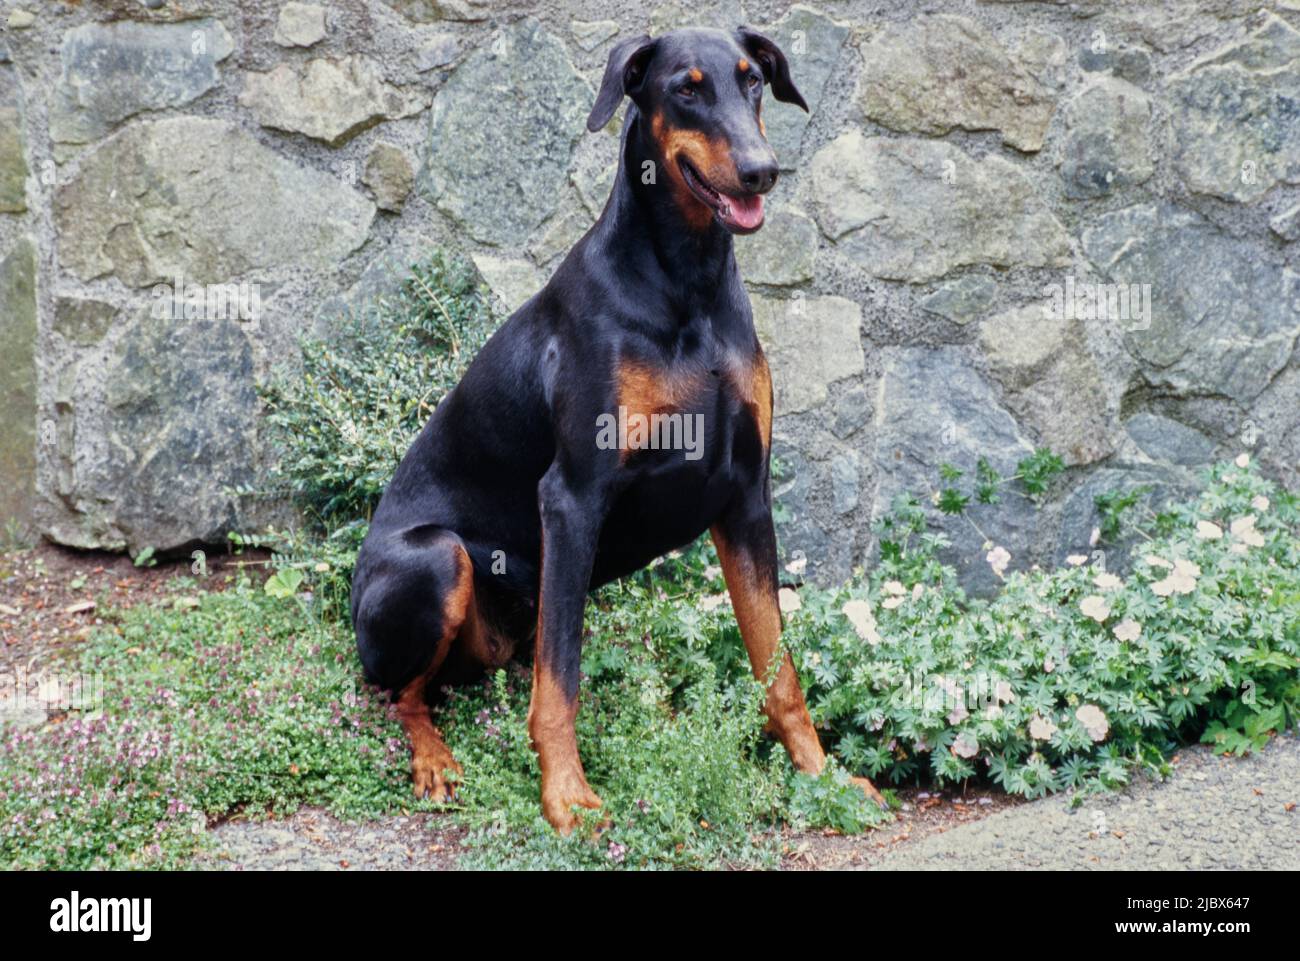 A Doberman sitting in front of a rock wall next to white flowers Stock Photo